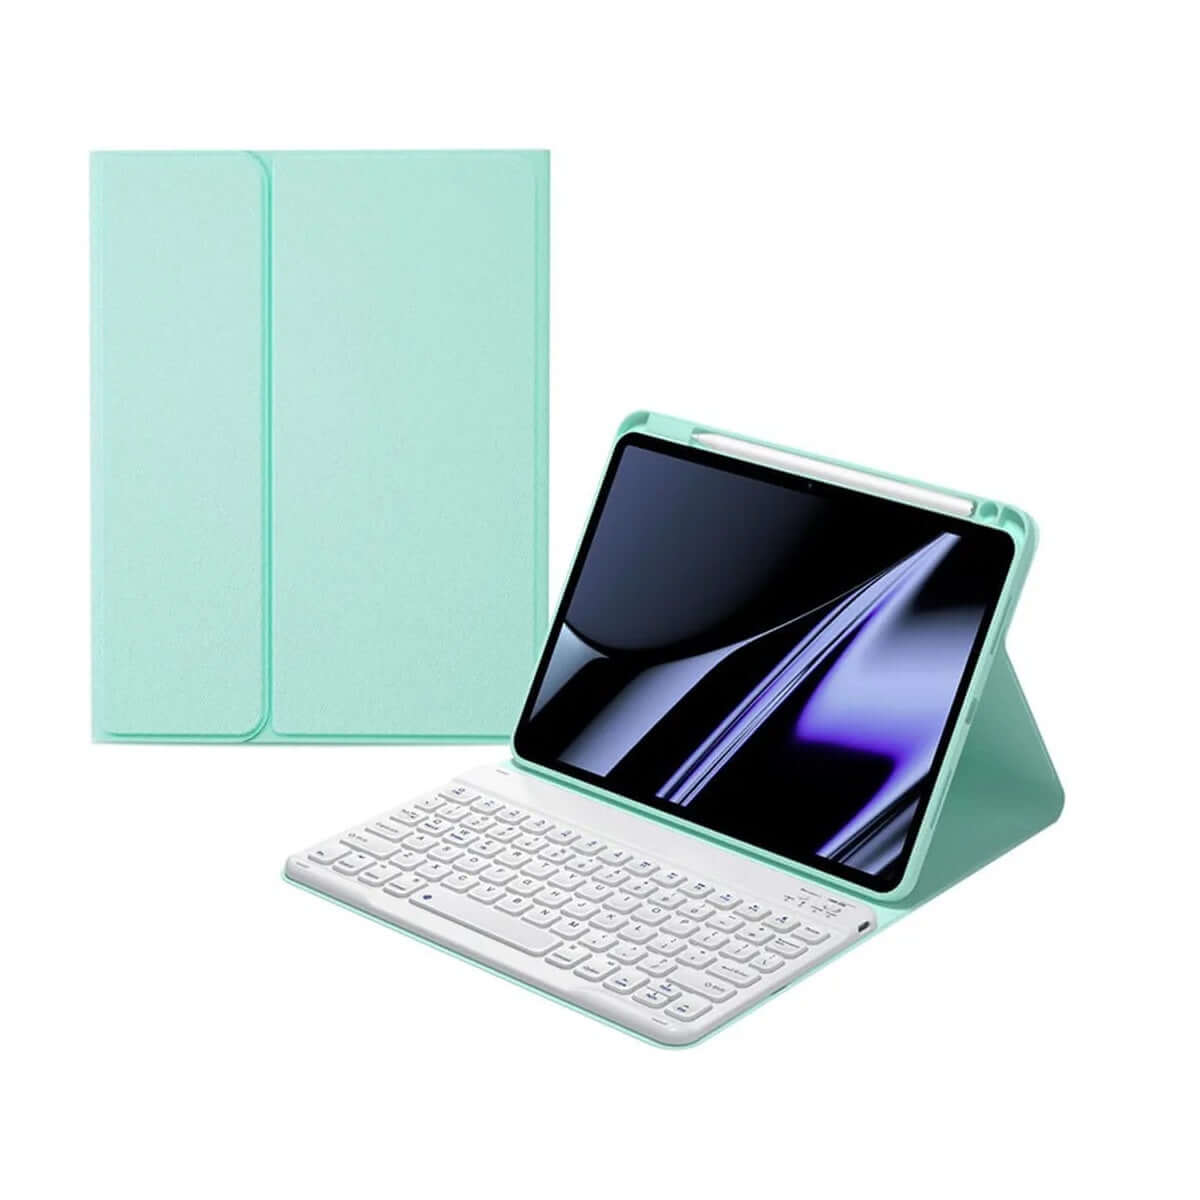 Bluetooth Keyboard Case for iPad Air 2/ 6th 2018 /5th 2017 removable keyboard